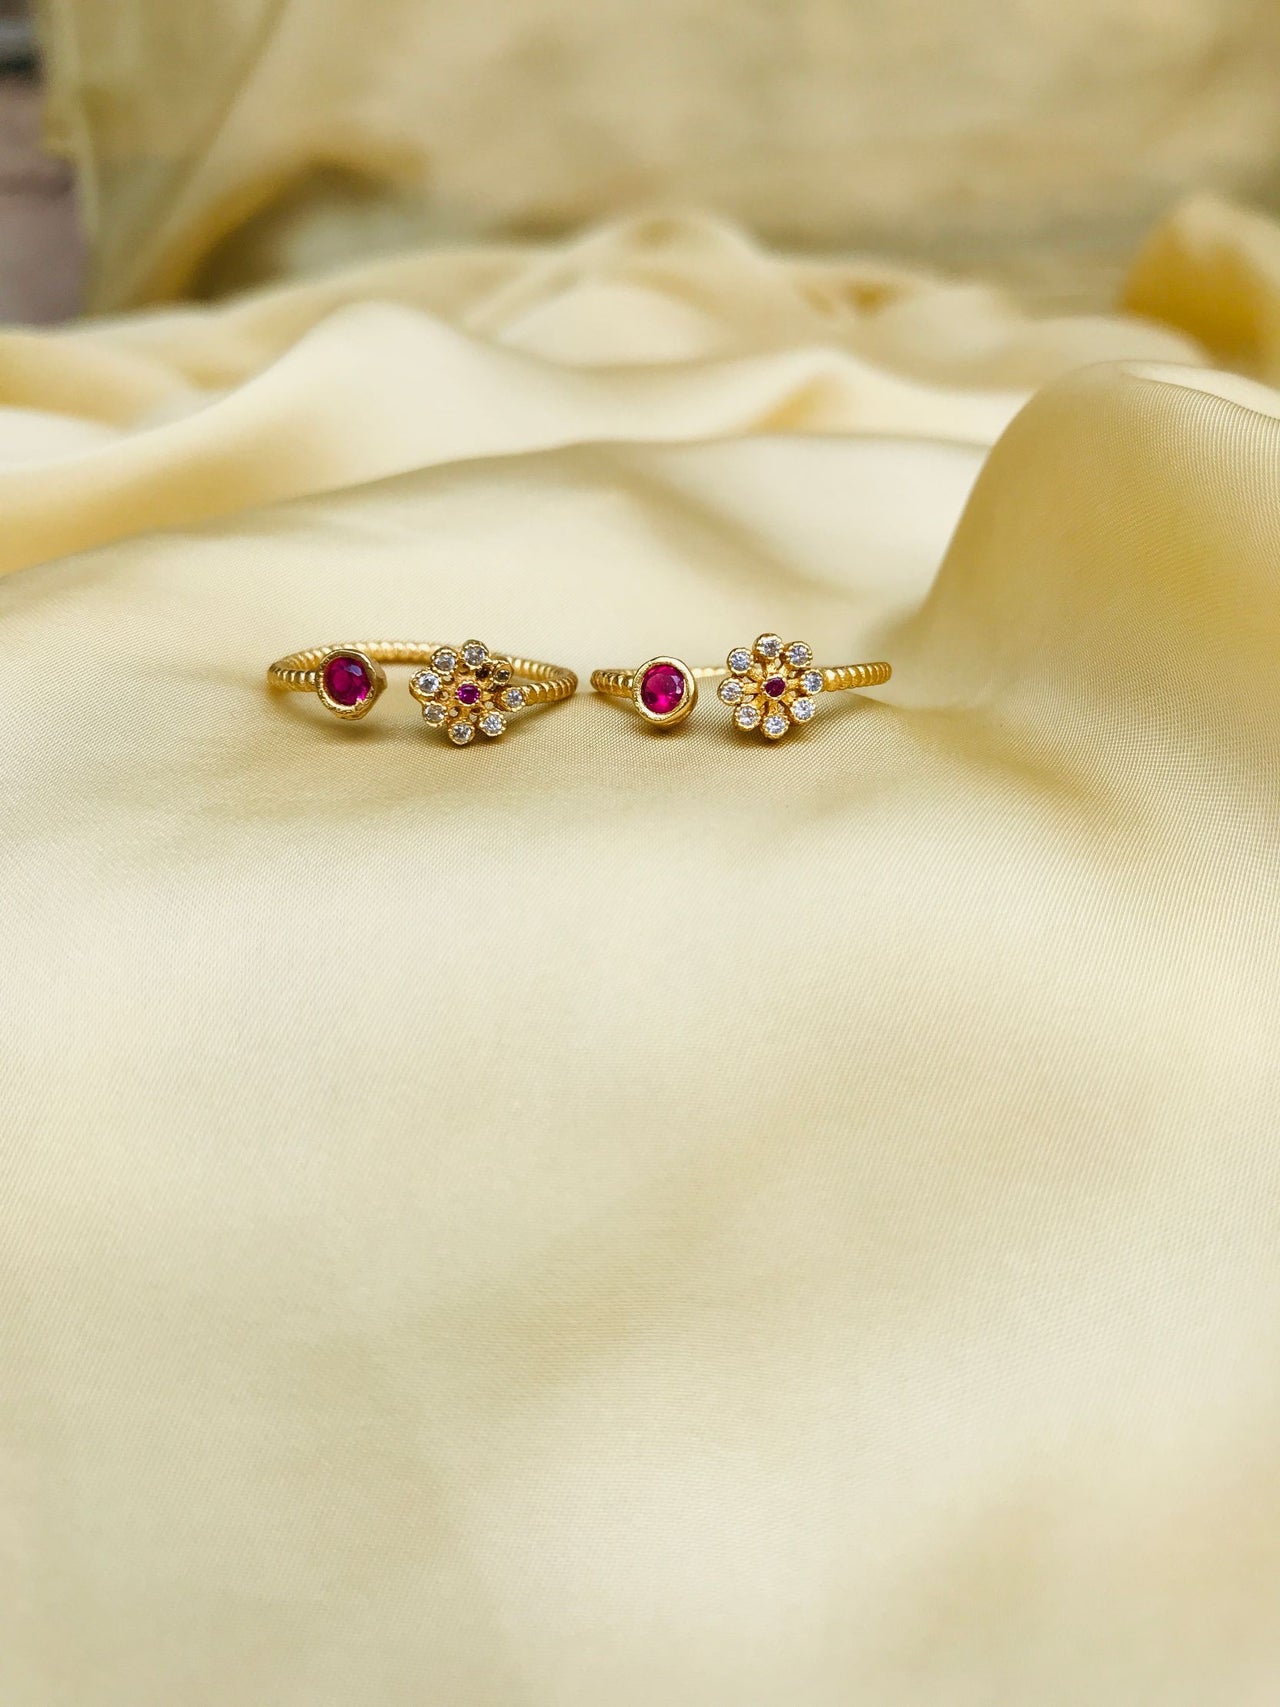 Gold Plated Pink Floral AD Stone Toe Rings - Abdesignsjewellery